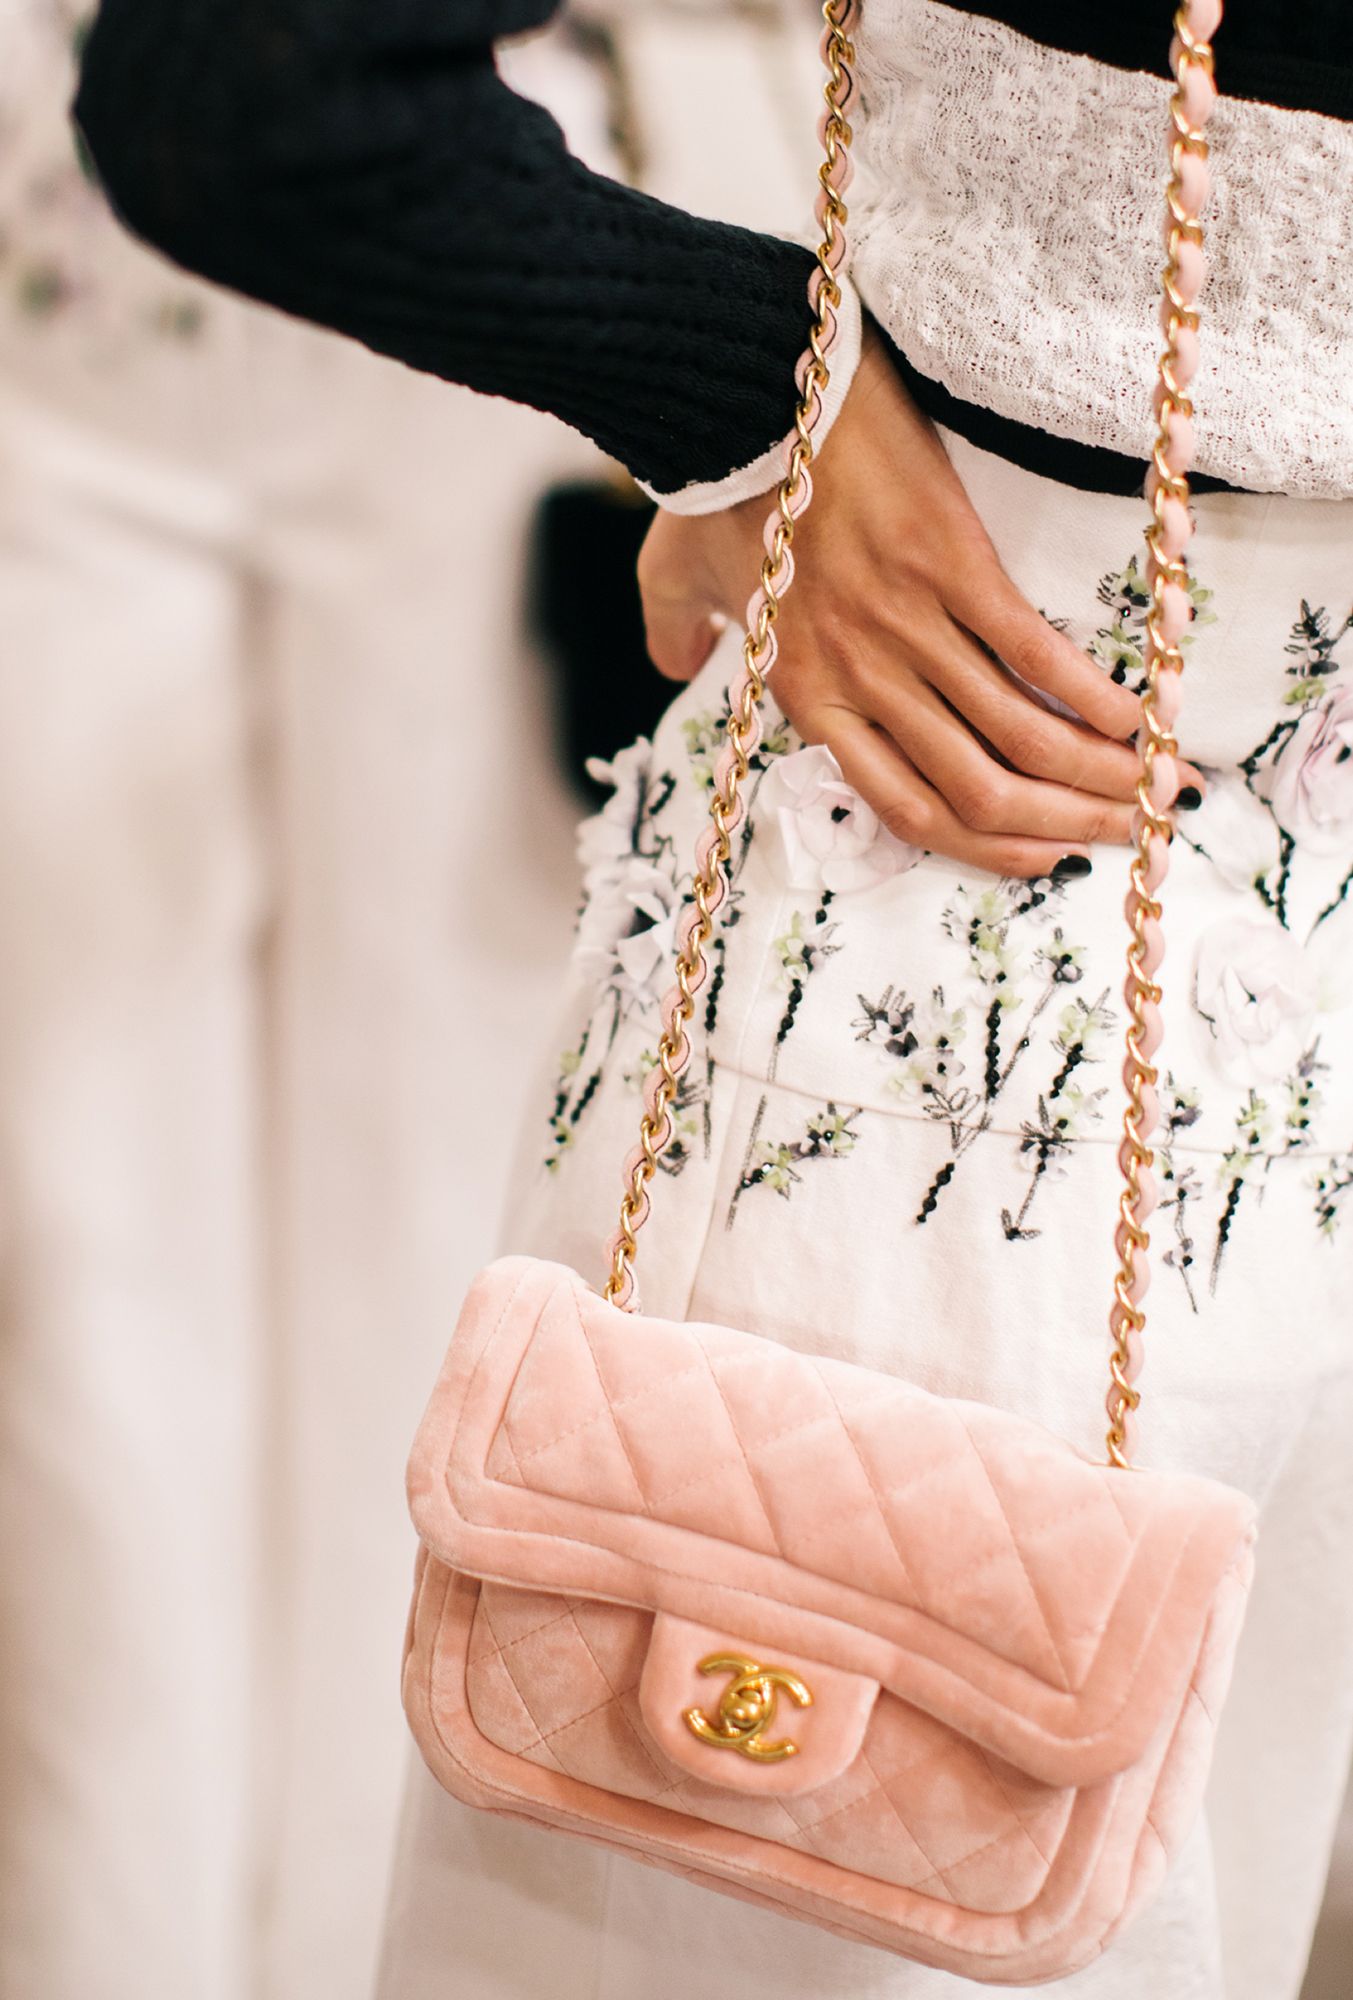 Chanel Cruise 2020 Bag Collection featuring Denim  Spotted Fashion